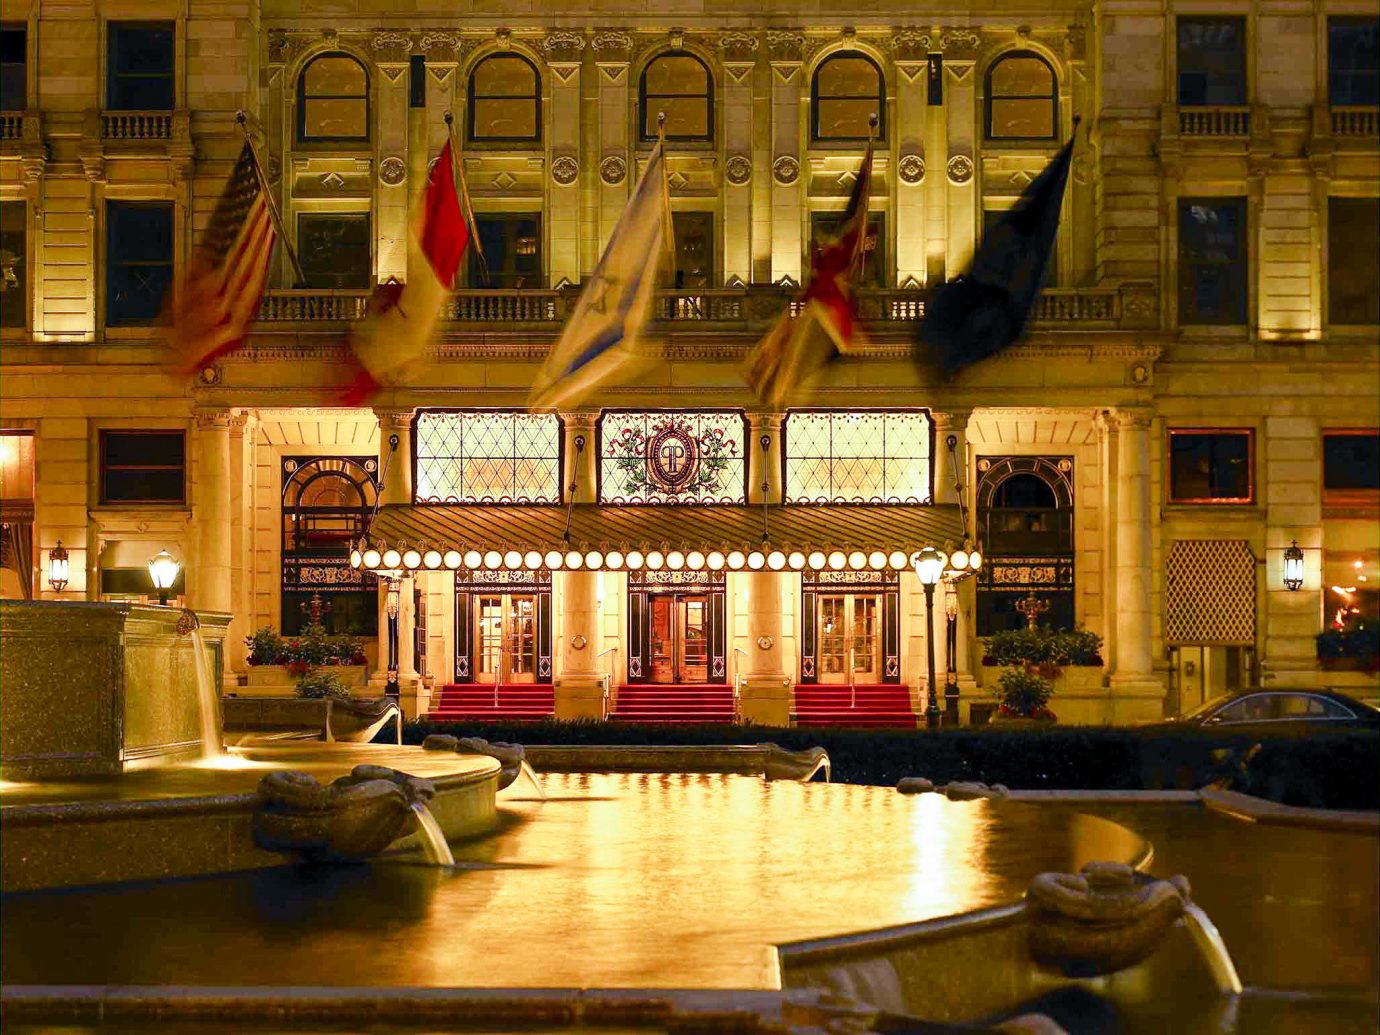 Exterior of the Plaza in New York City